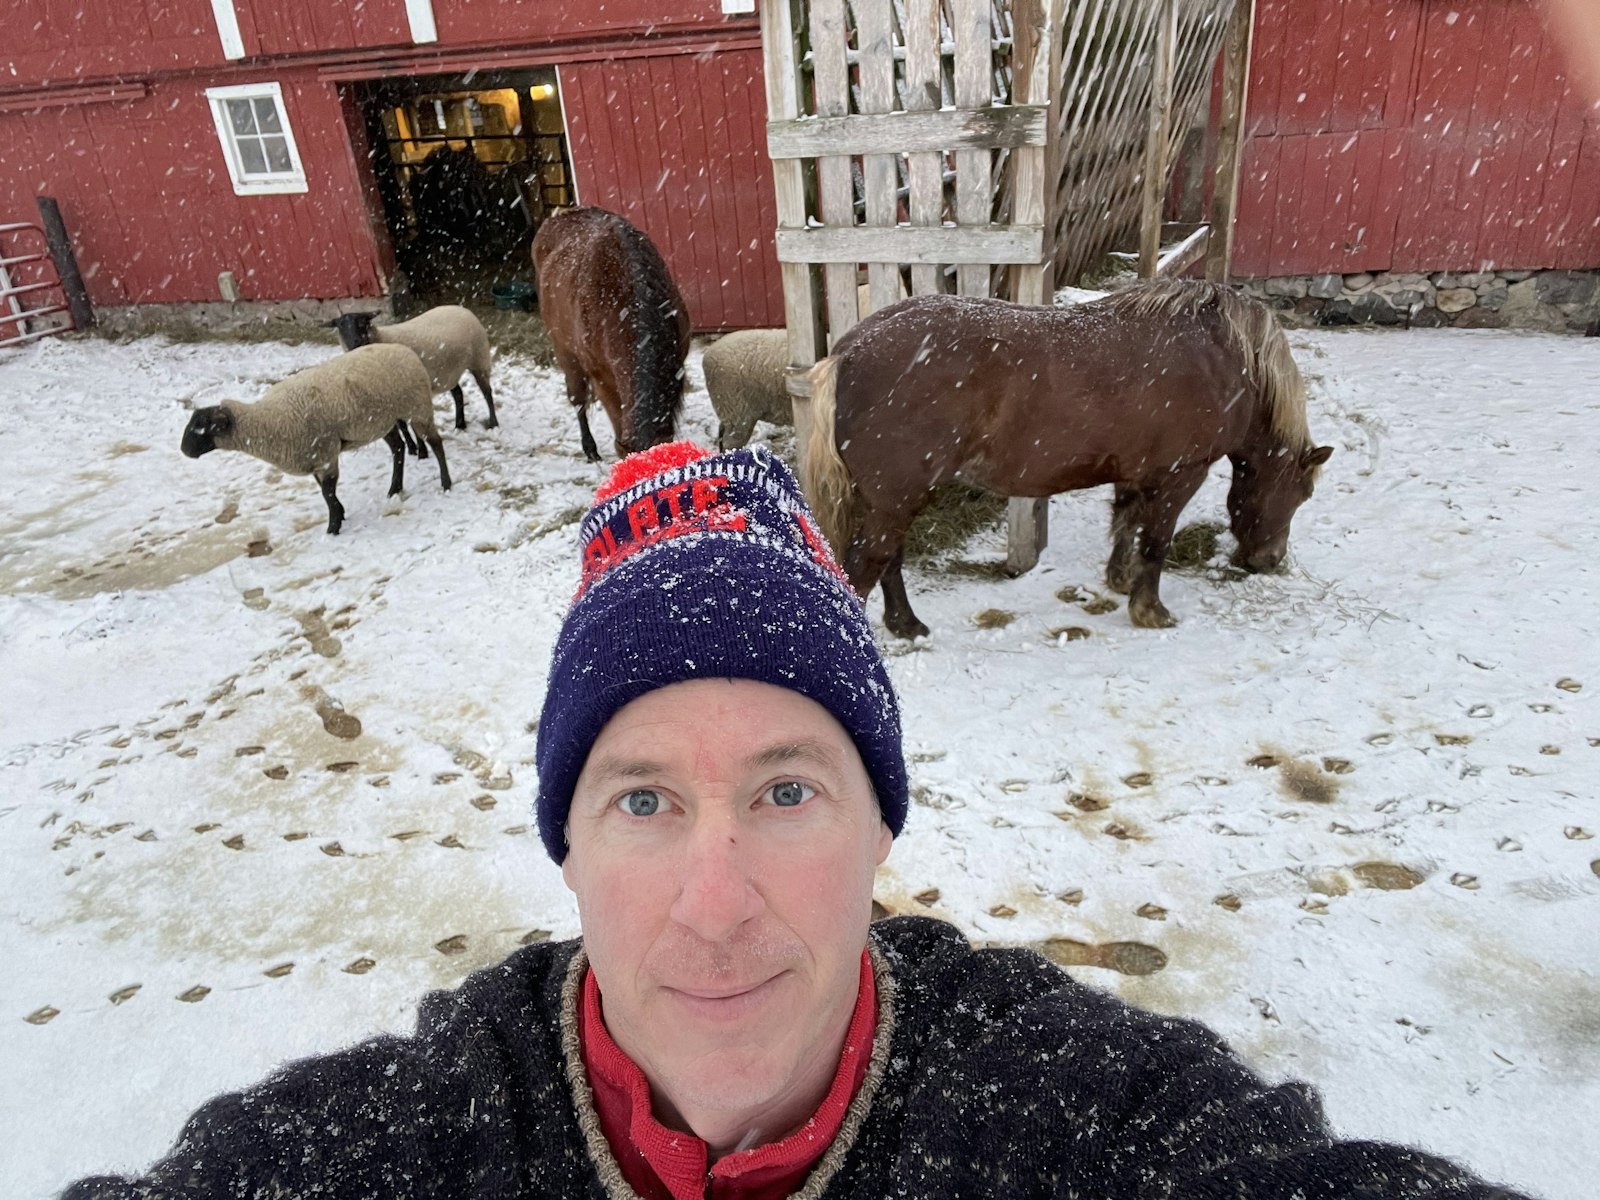 O'Rourke poses for a "selfie" with sheep and other animals on the family farm where his wife, Heidi, grew up. After returning to Michigan, the O'Rourkes returned to the farm, despite Brian's job more than 50 miles away in Detroit. There's always chores to be done, he says. (Courtesy of Brian O'Rourke)